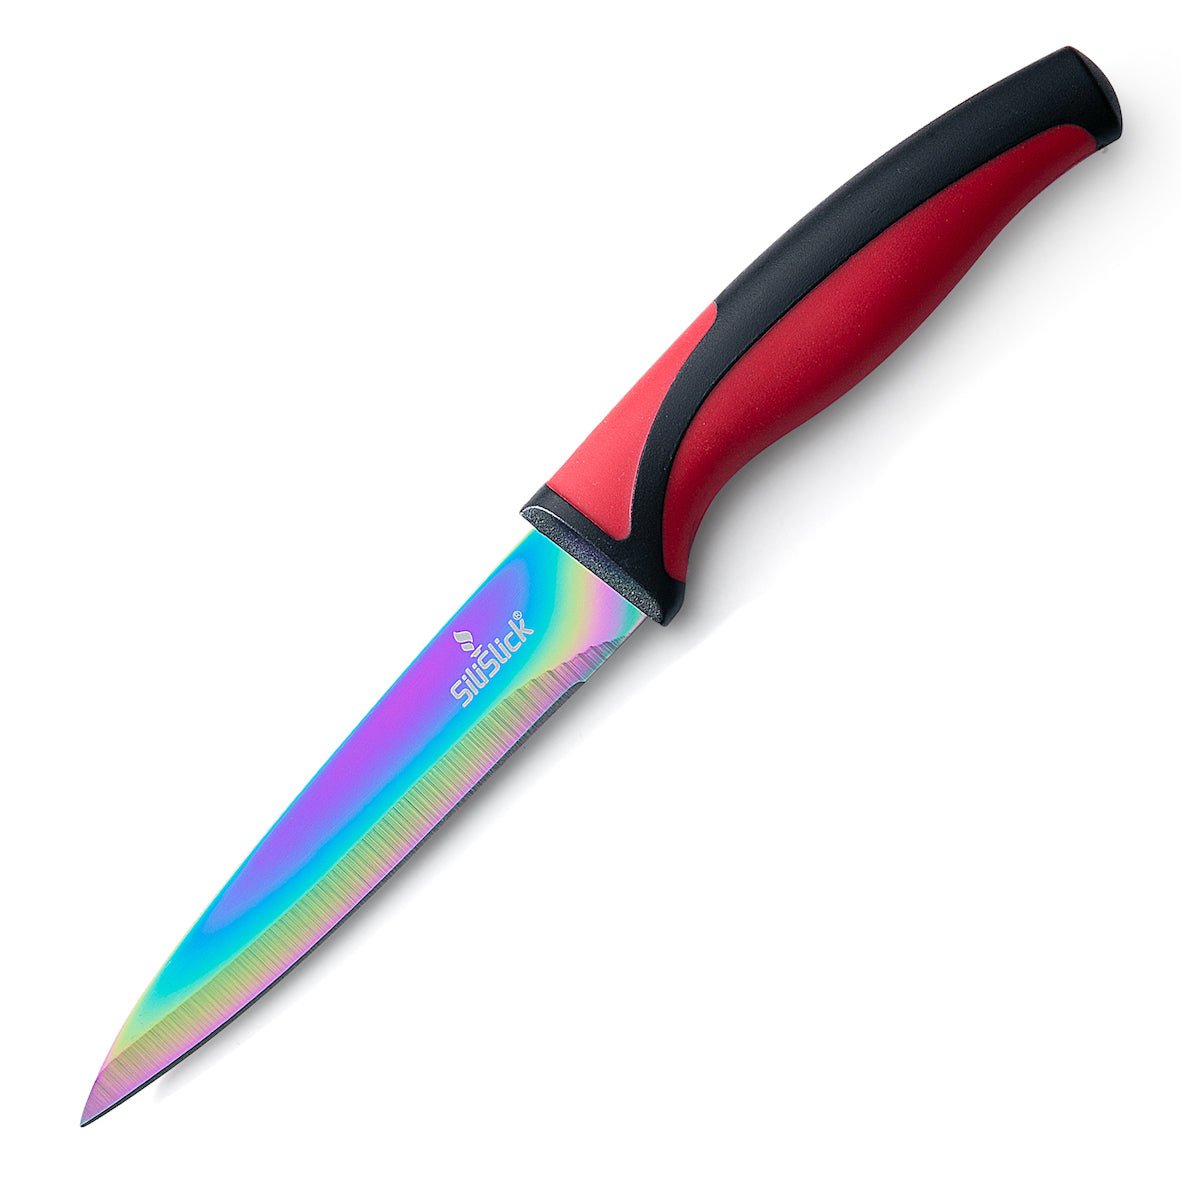 SiliSlick Stainless Steel Steak Knife Red Handle Set Of 4 - Titanium Coated Rainbow Iridescent Kitchen Straight Edge For Cutting Meat